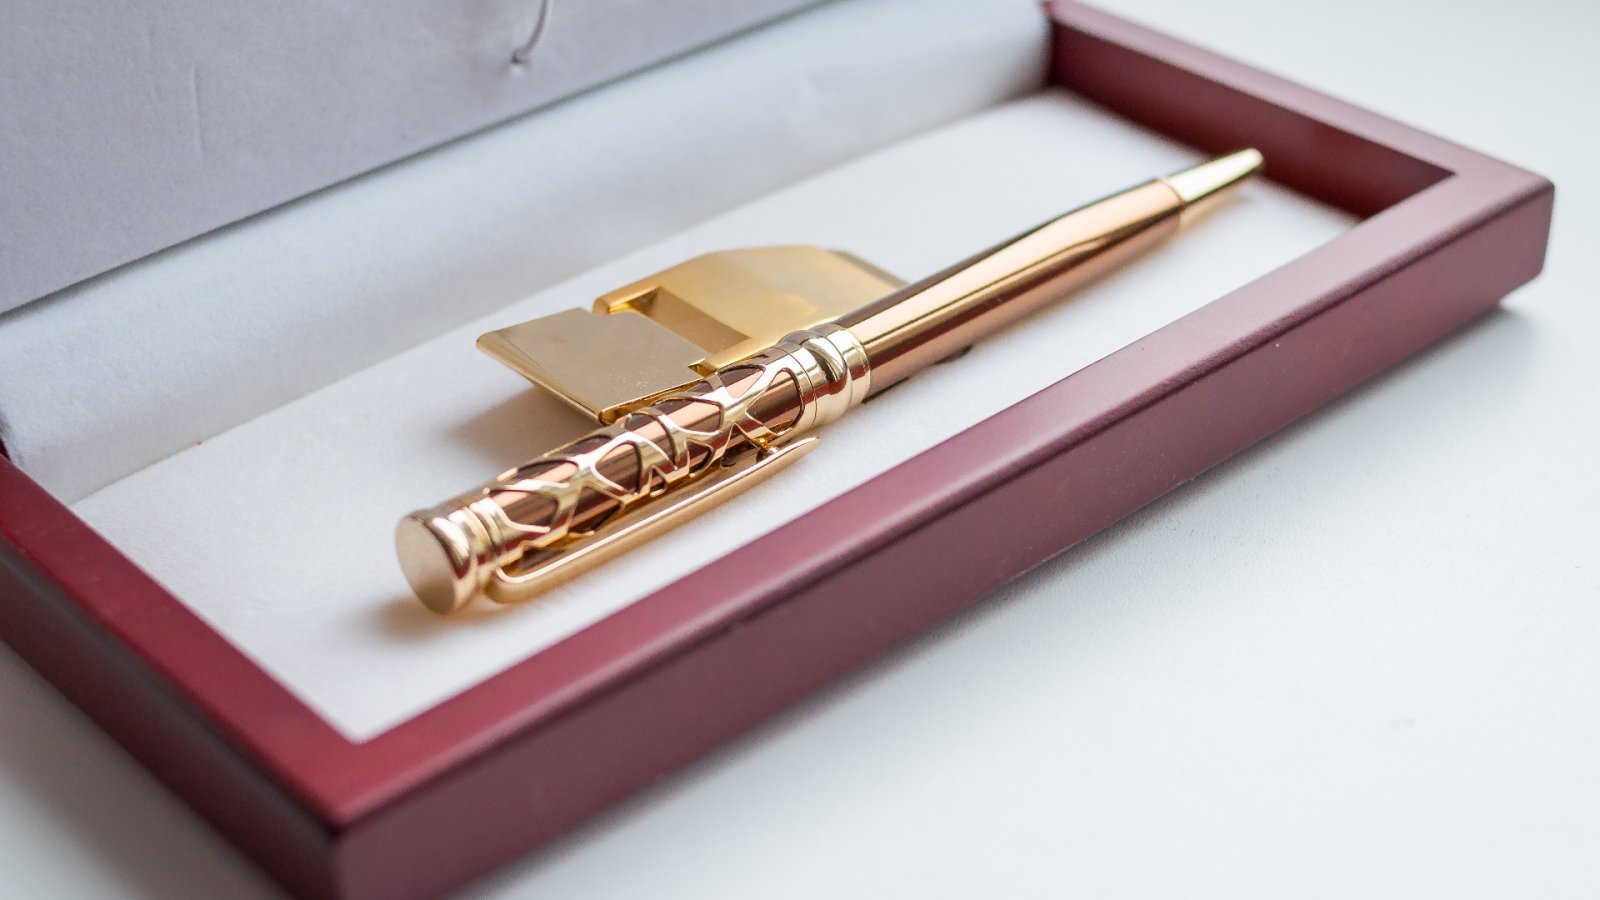 These Cartier pens will make you feel like a prince